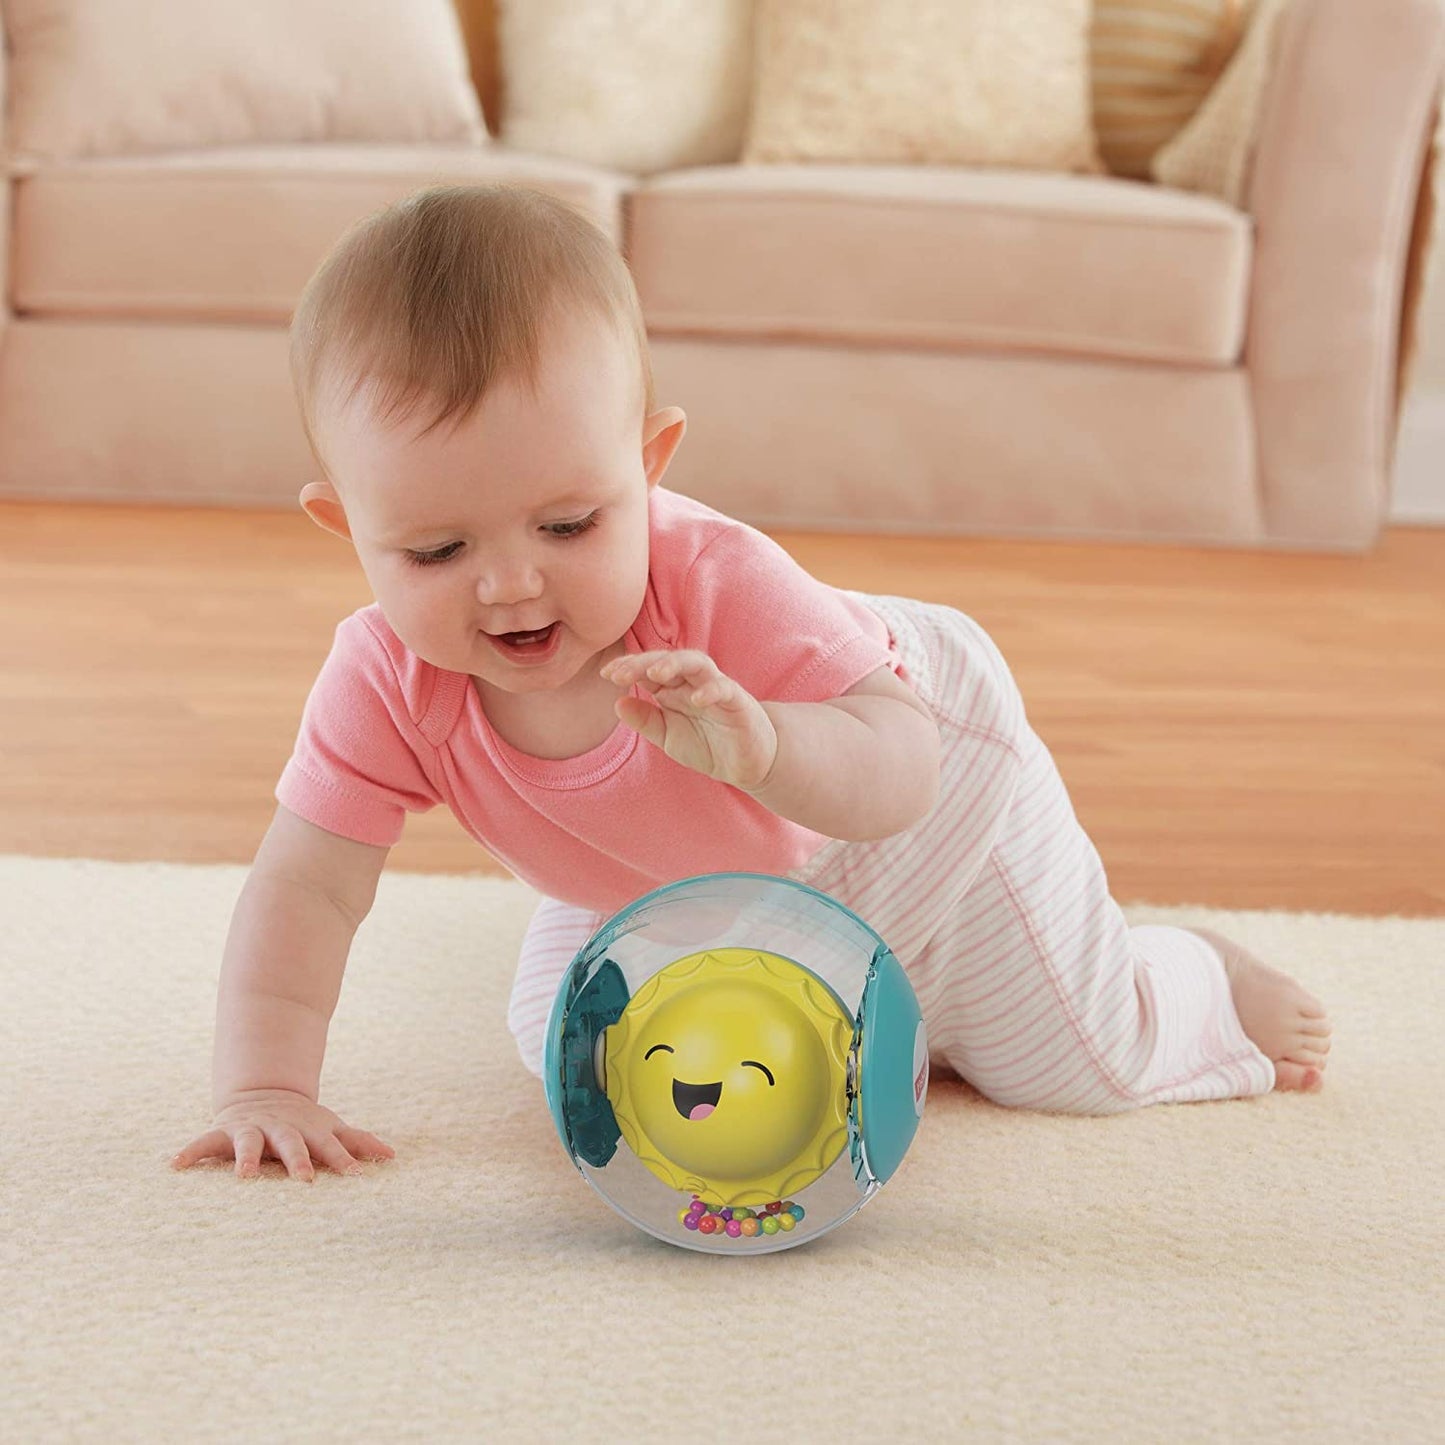 Fisher-Price Hello Sunshine Rattle Ball - 2 ways to play, Little ones can shake, rattle, and crawl along